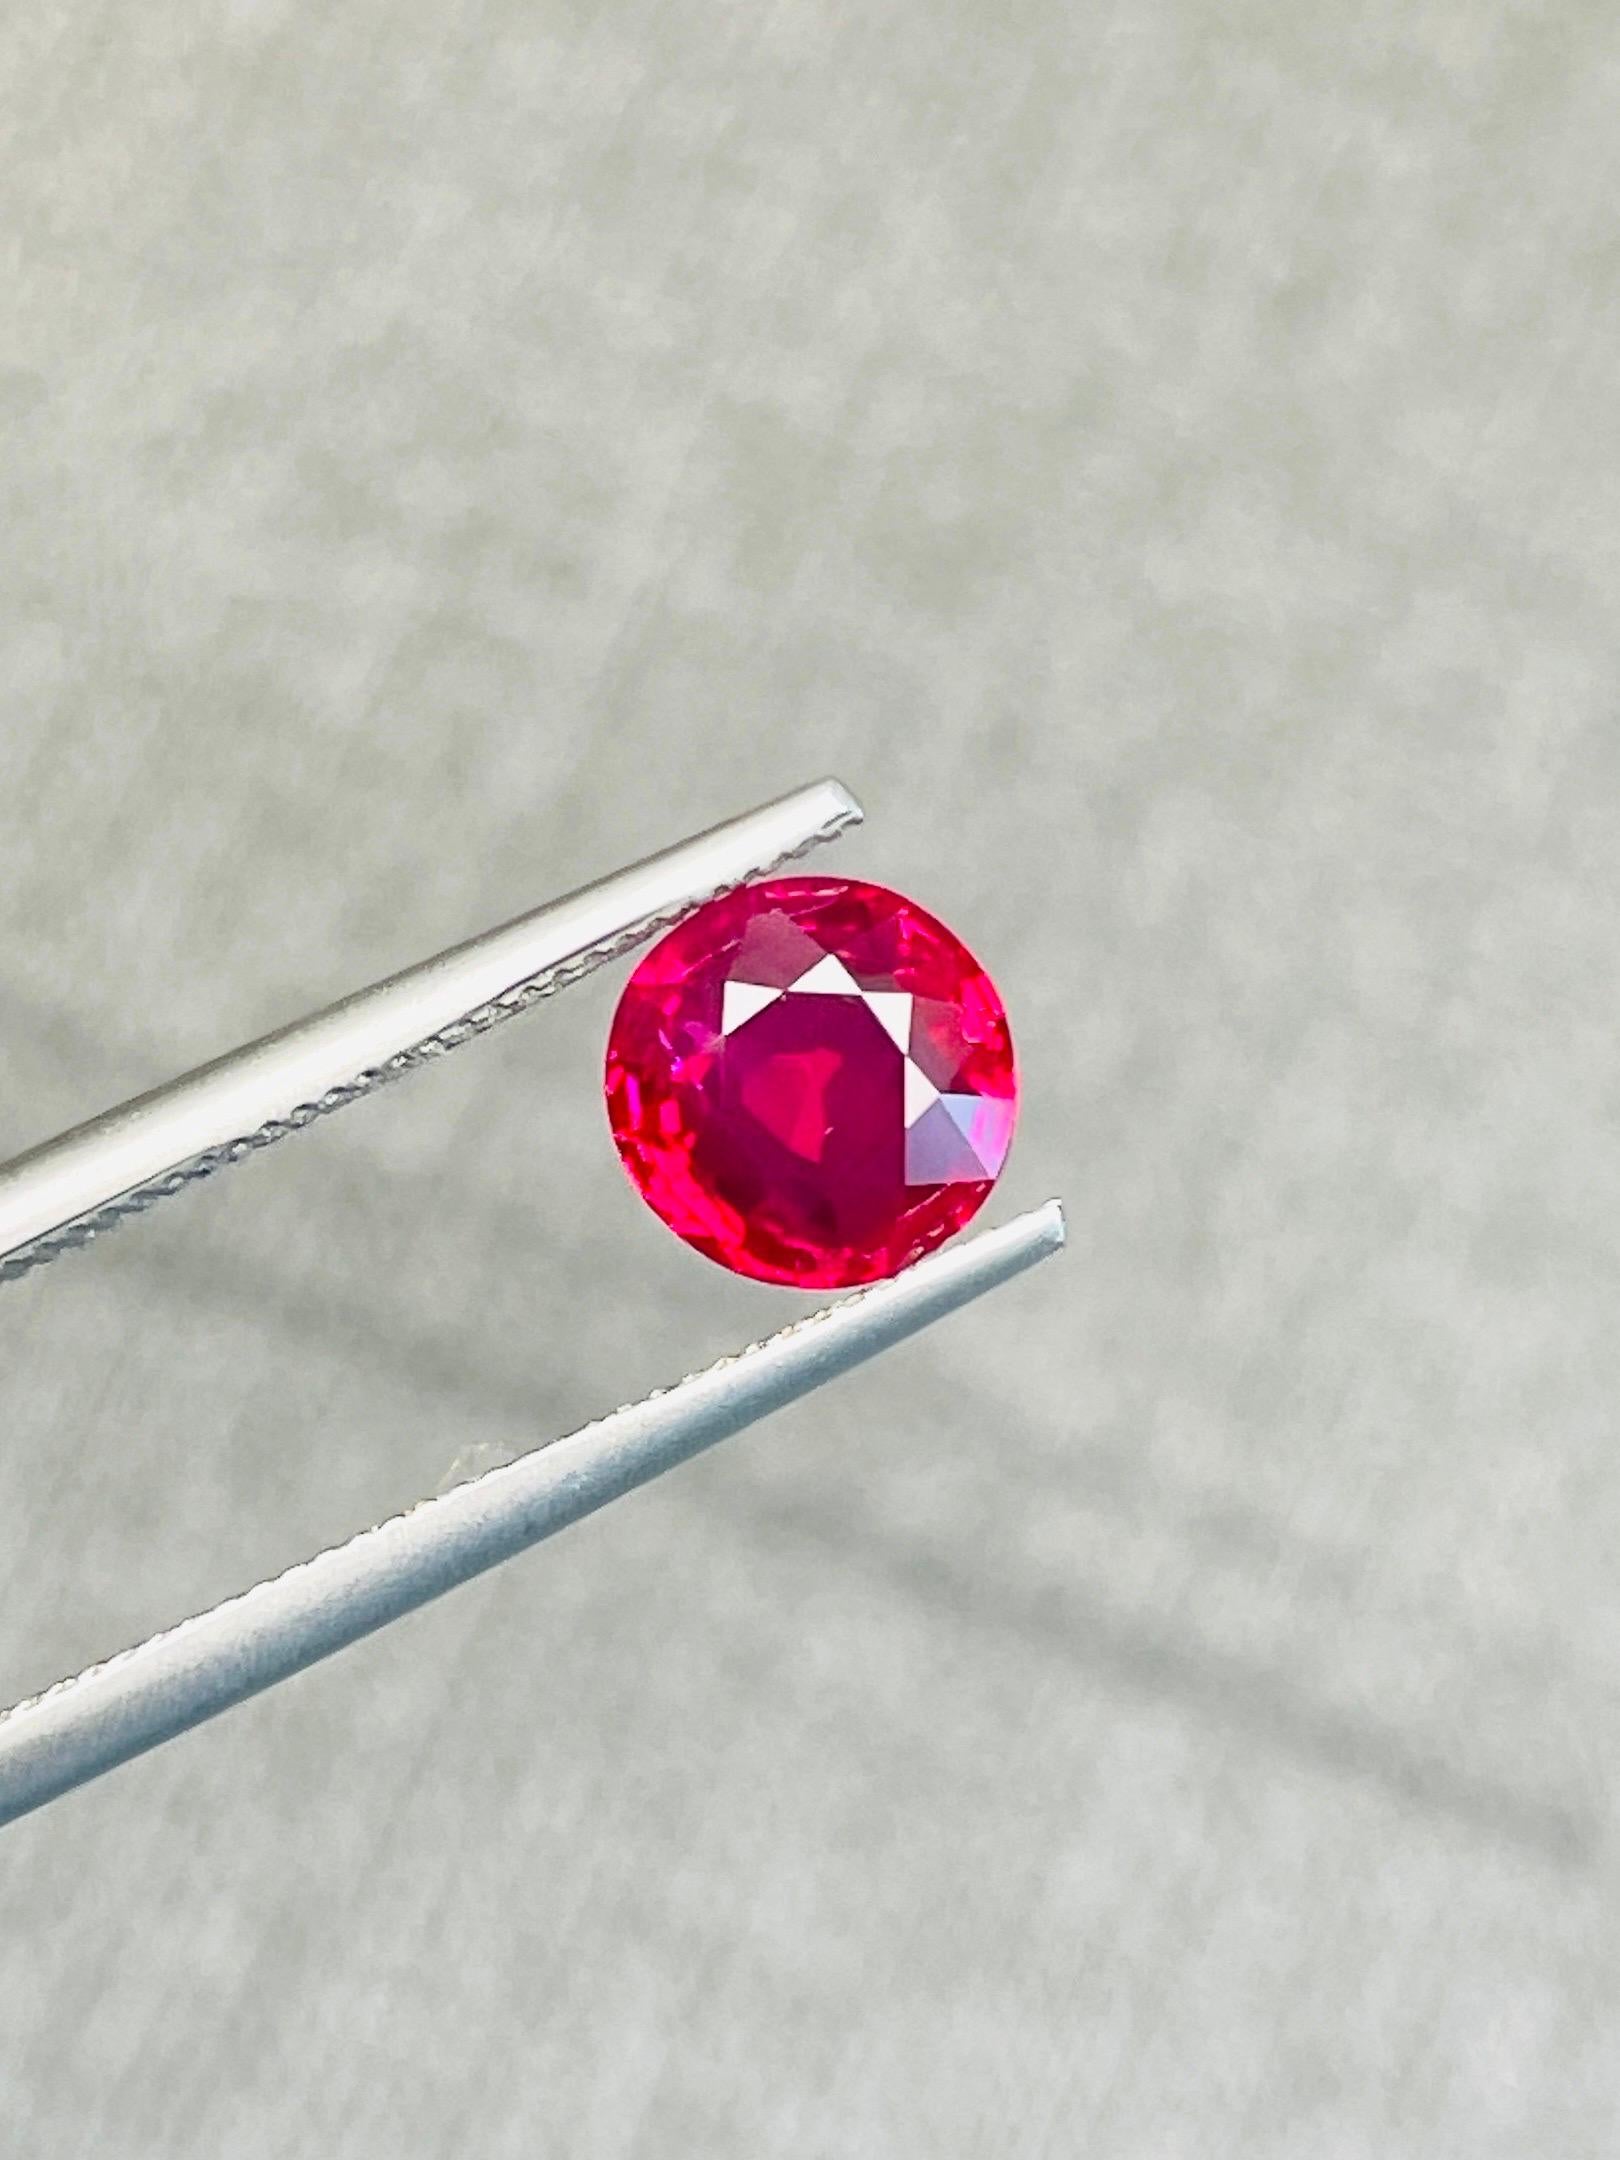 Perfect quality of burma ruby pigeon blood Unheated 1.08ct AIGS certified  1